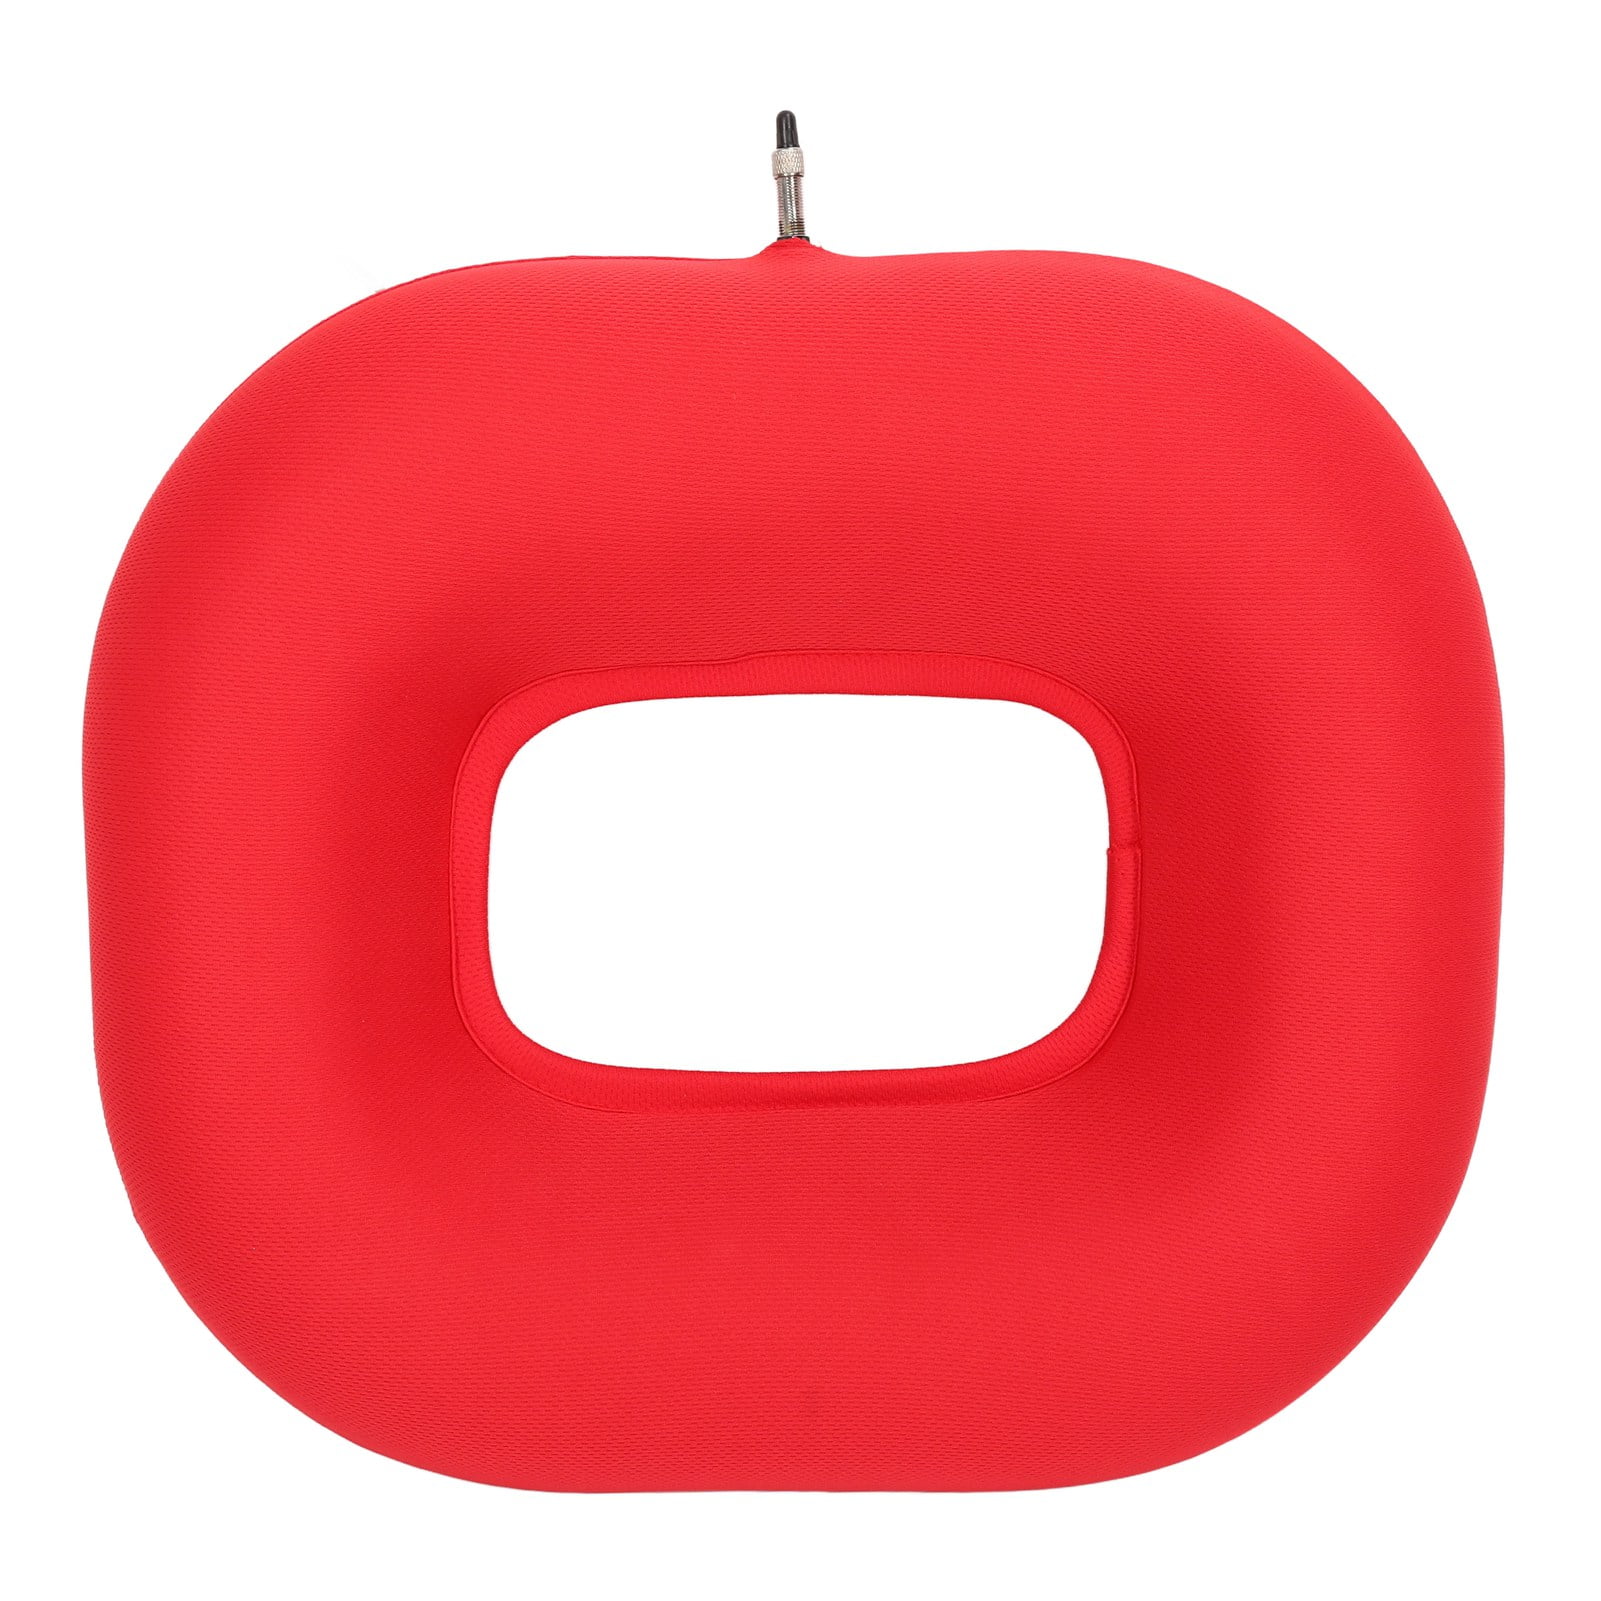 Dr. Frederick's Original Donut Cushion 15 Inflatable Donut Pillow